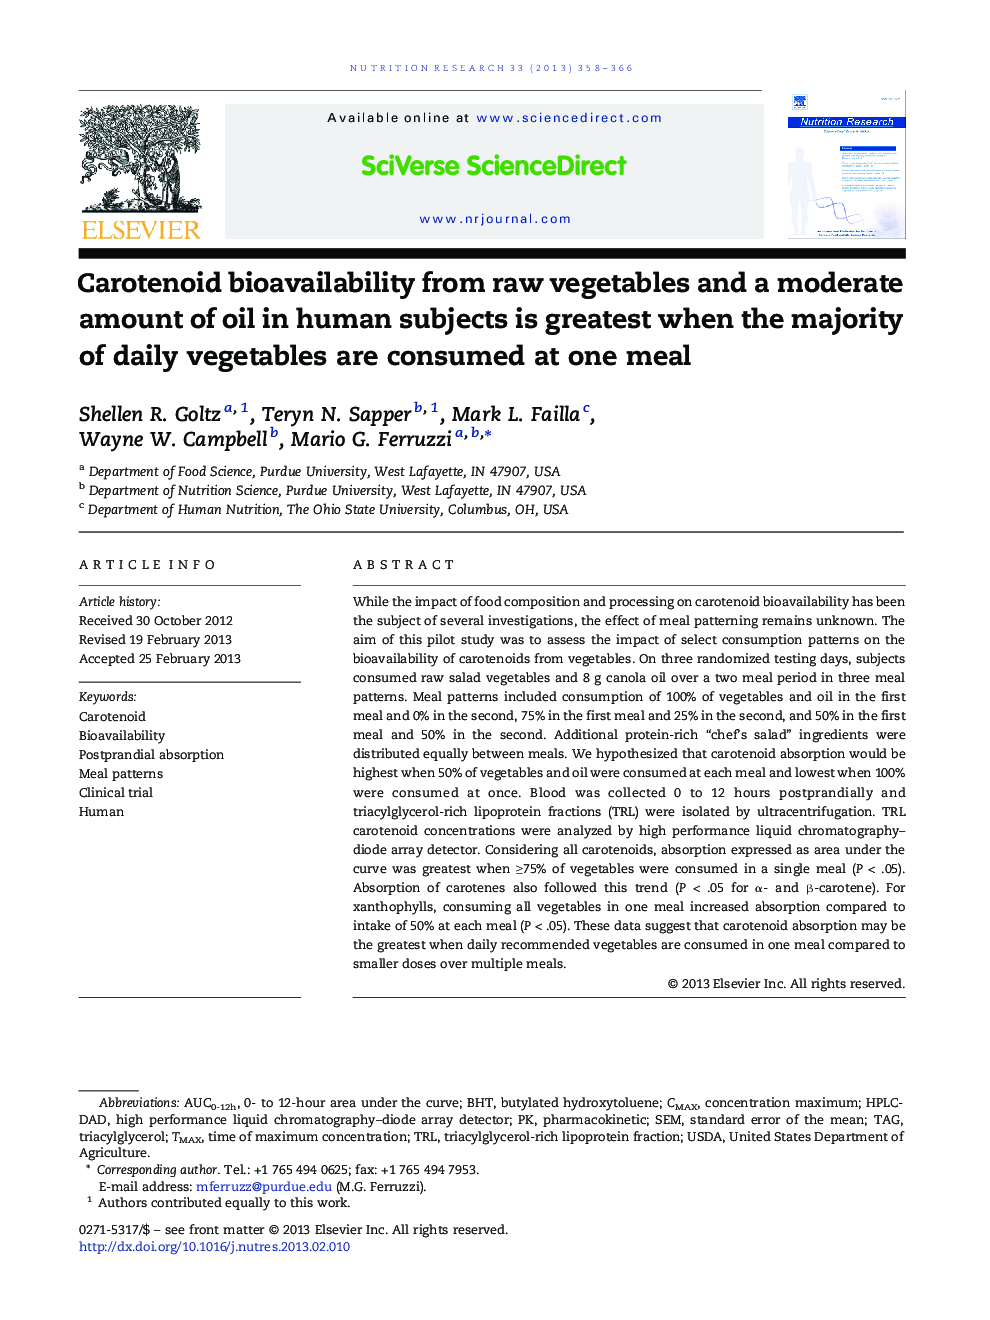 Carotenoid bioavailability from raw vegetables and a moderate amount of oil in human subjects is greatest when the majority of daily vegetables are consumed at one meal